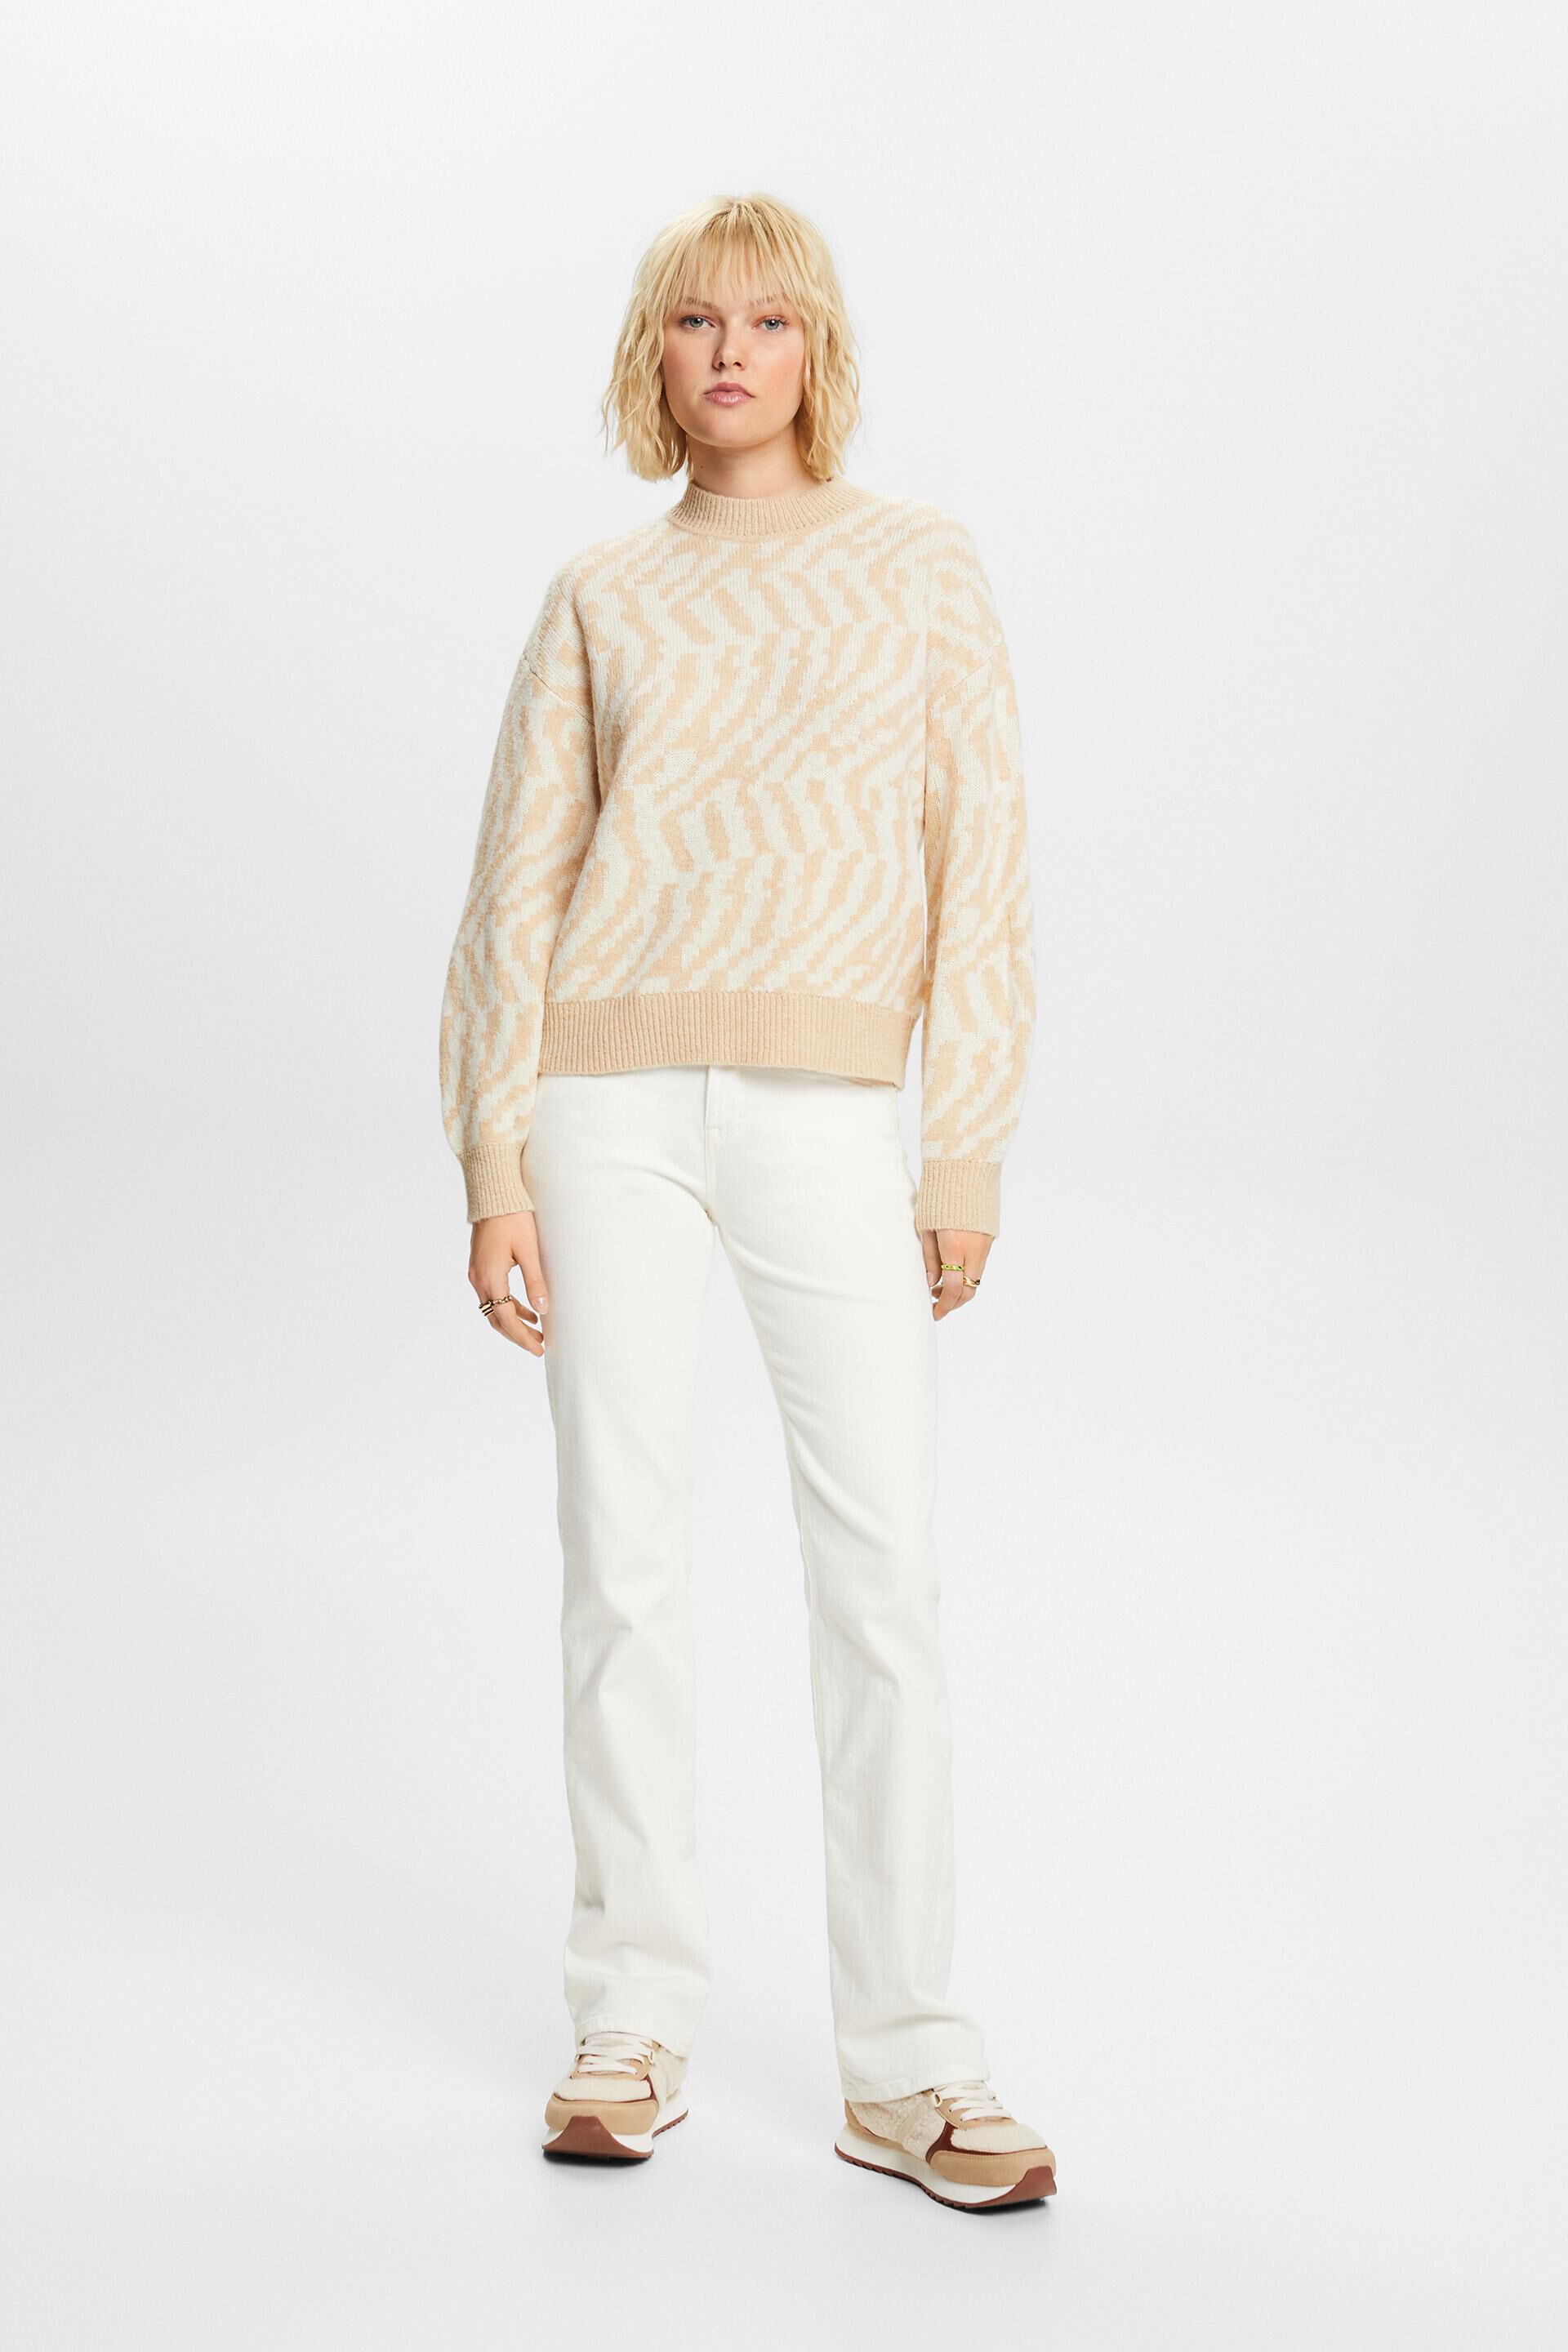 ESPRIT - Short-sleeved jacquard rib sweater at our online shop